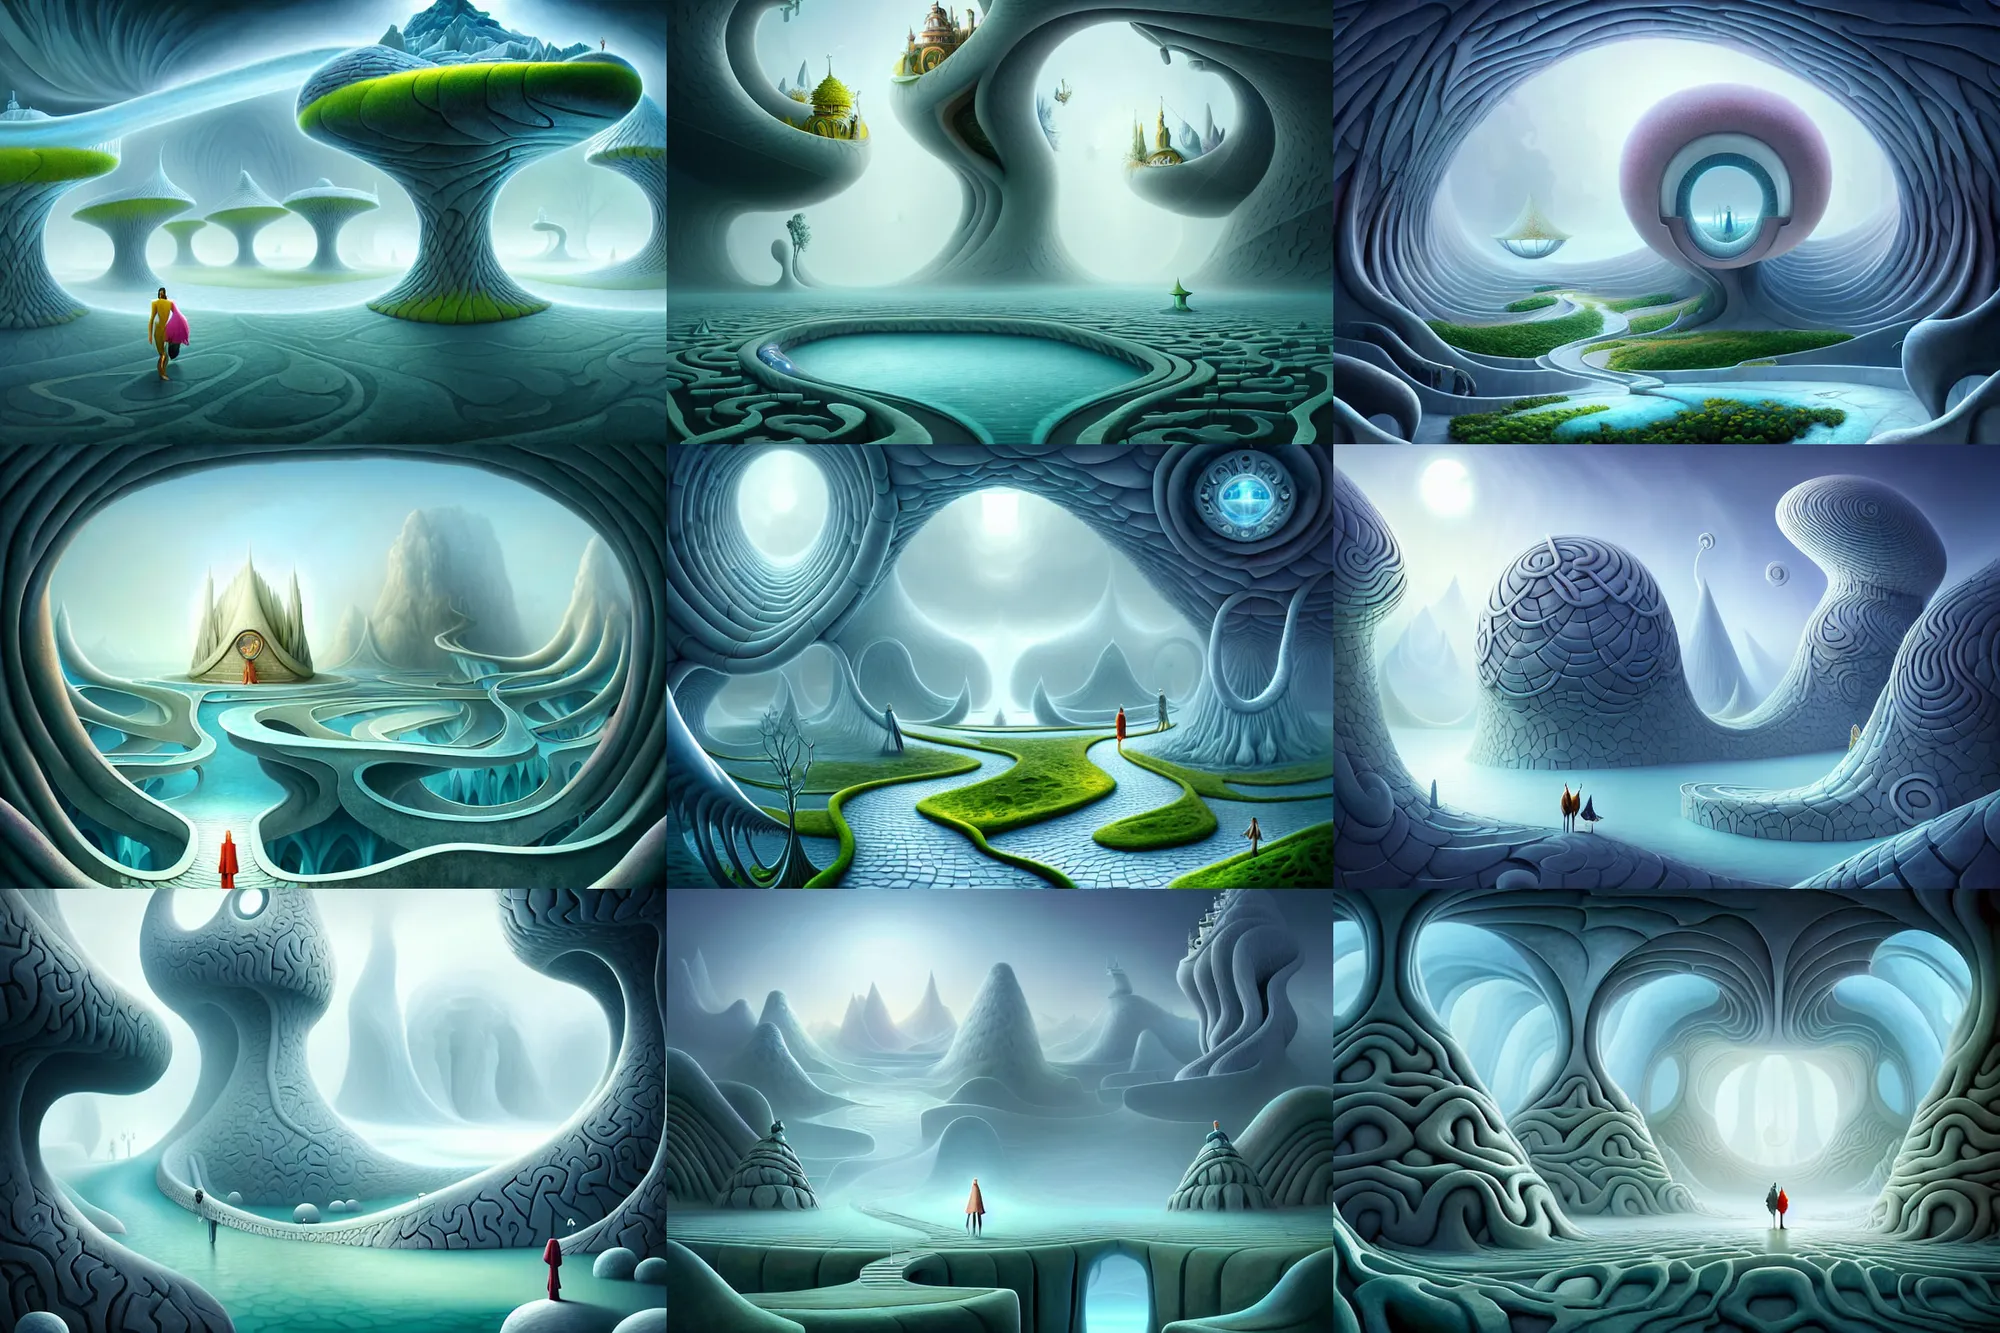 Prompt: a matte painting of an impossible path winding through arctic dream worlds with surreal architecture designed by heironymous bosch, structures inspired by heironymous bosch's garden of earthly delights, surreal ice interiors by cyril rolando and asher durand and natalie shau, insanely detailed, whimsical, intricate, mystical